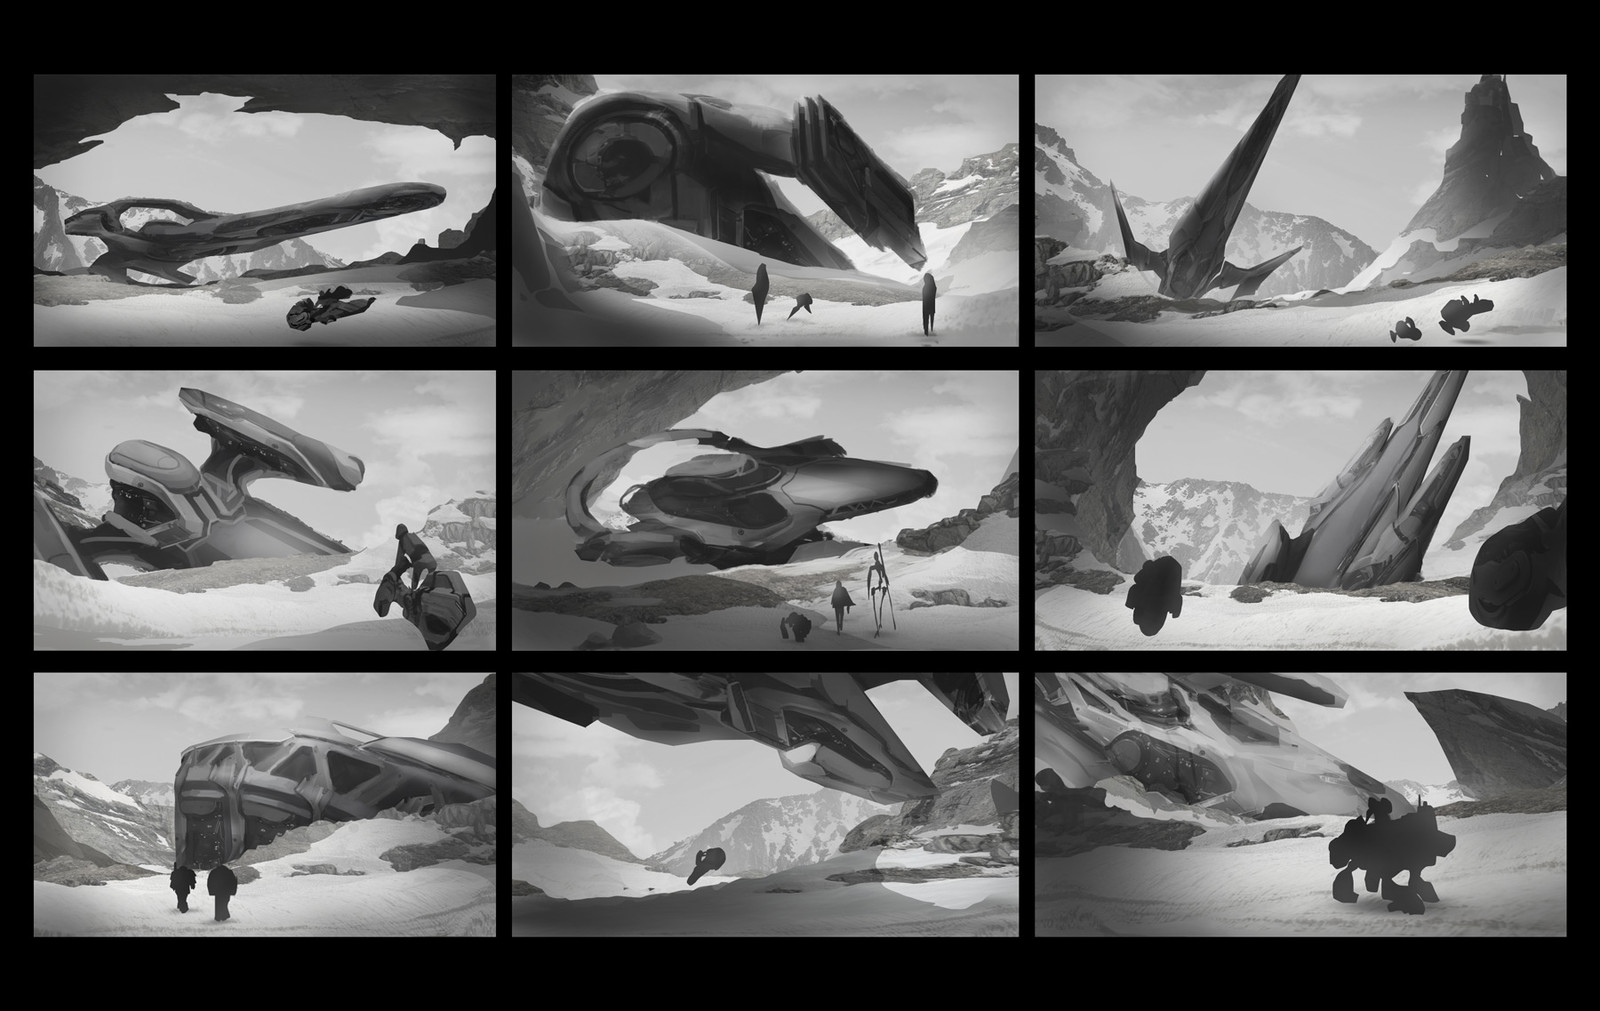 Composition and story sketches.